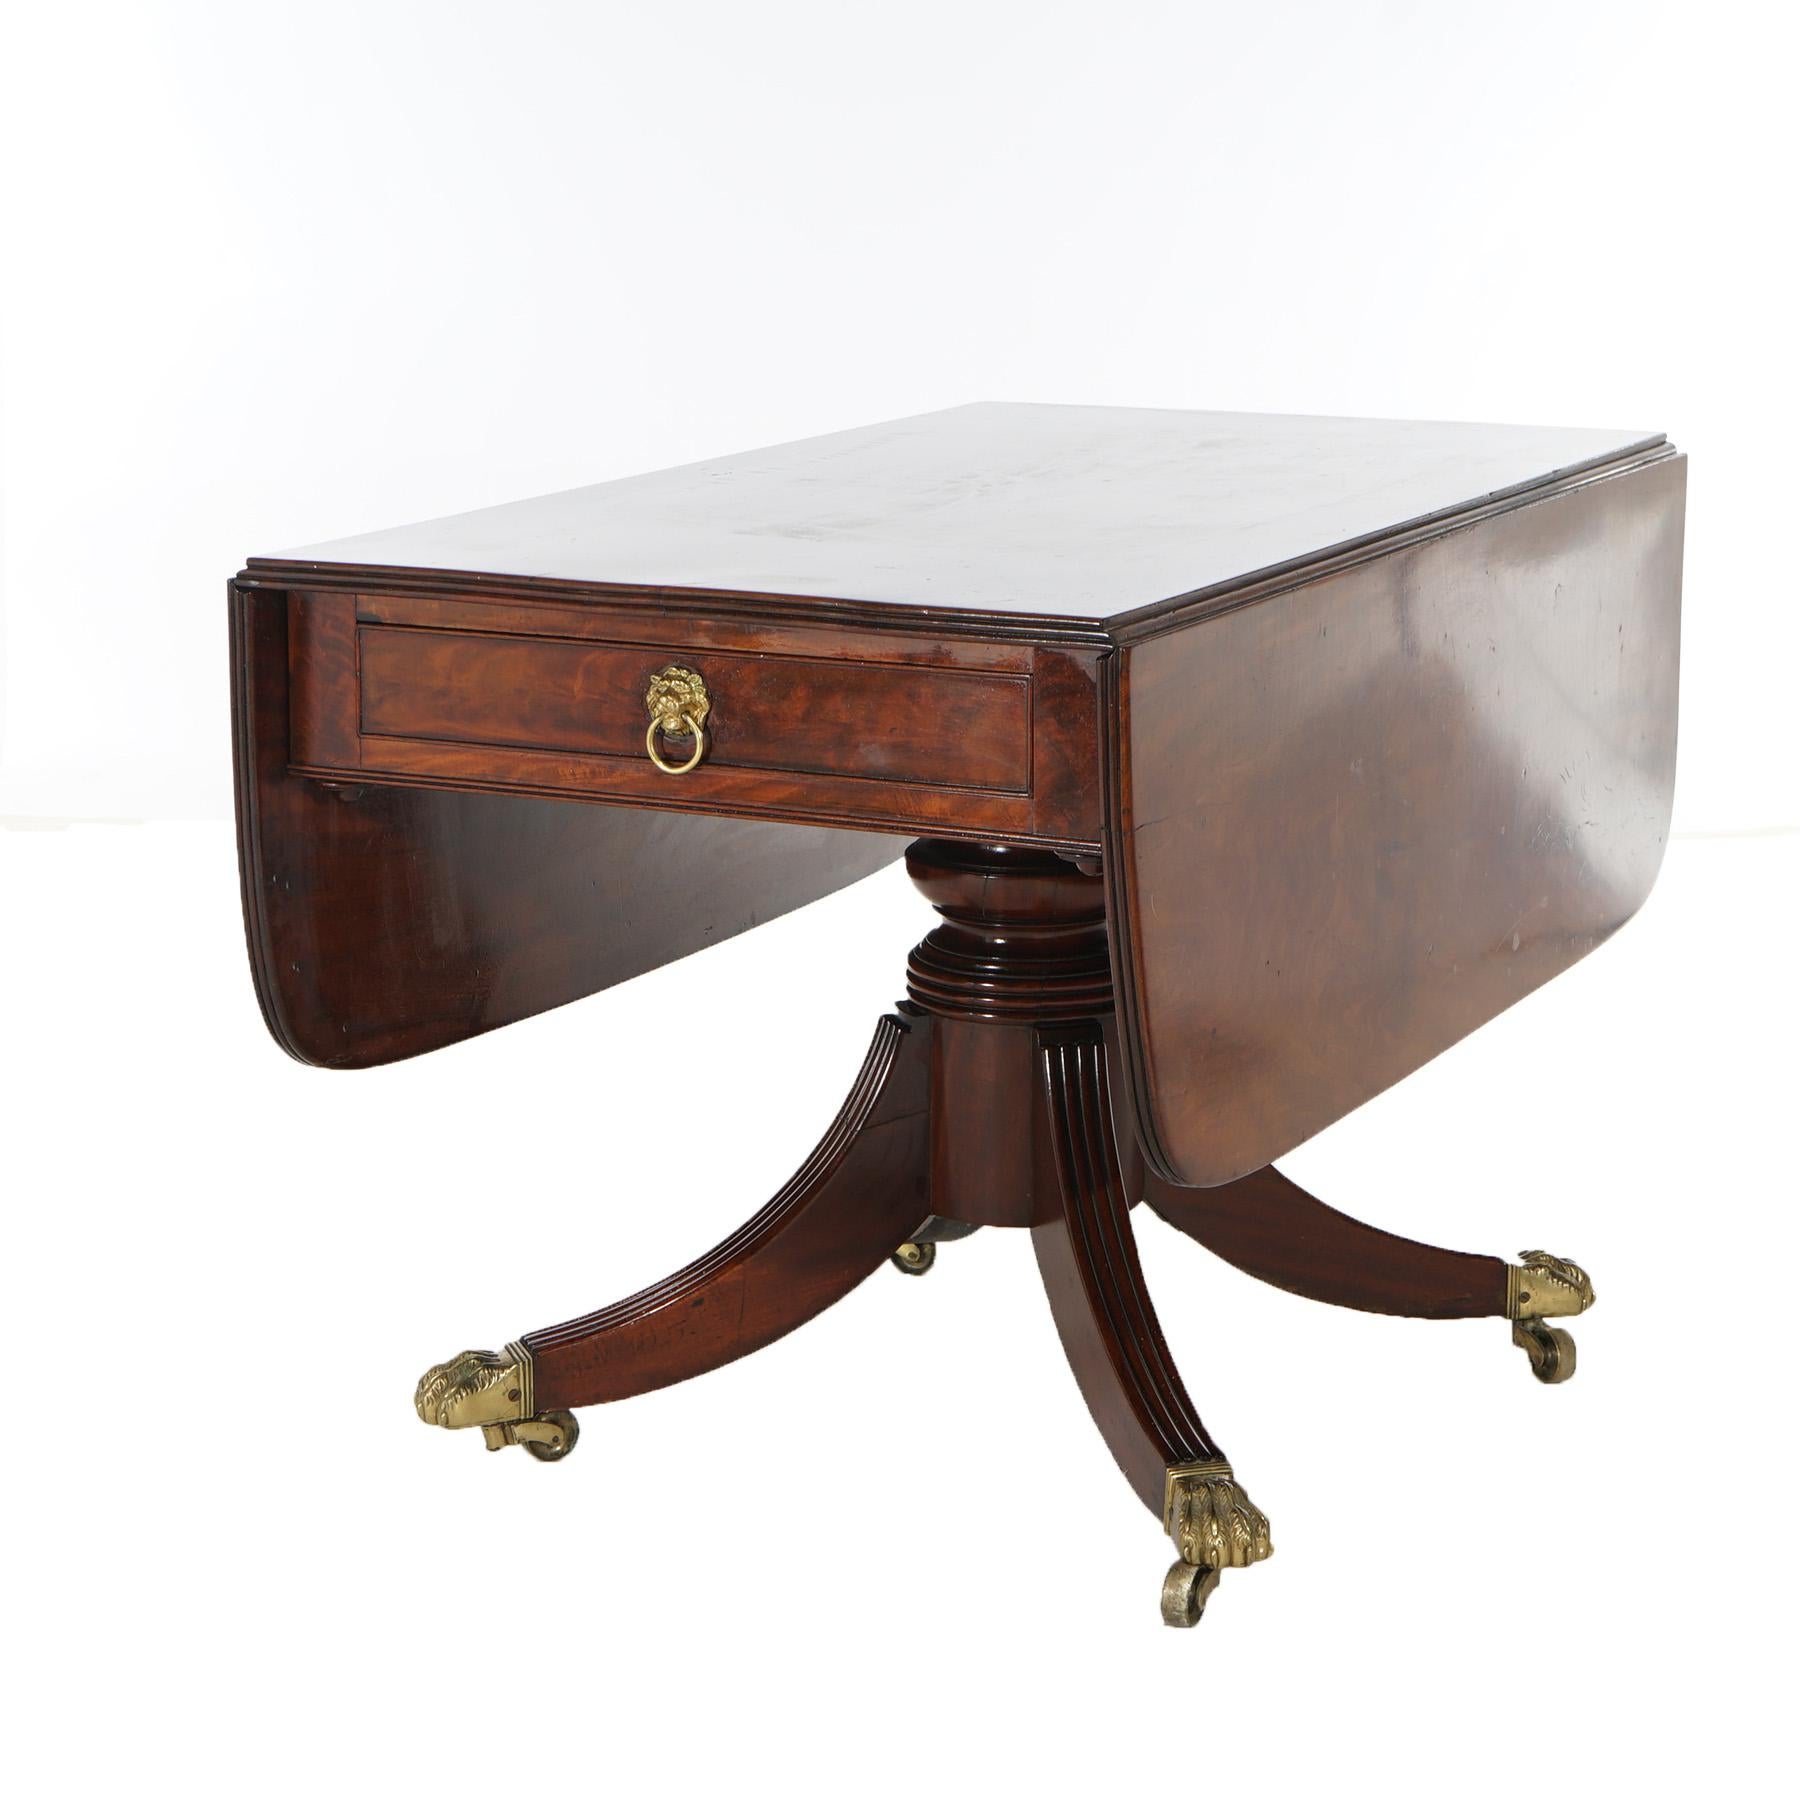 An antique English George III style table offers mahogany construction with top having drop leaves over single drawer having flame mahogany facing and cast lion head pull surmounting urn form pedestal base having four Duncan Phyfe reeded legs